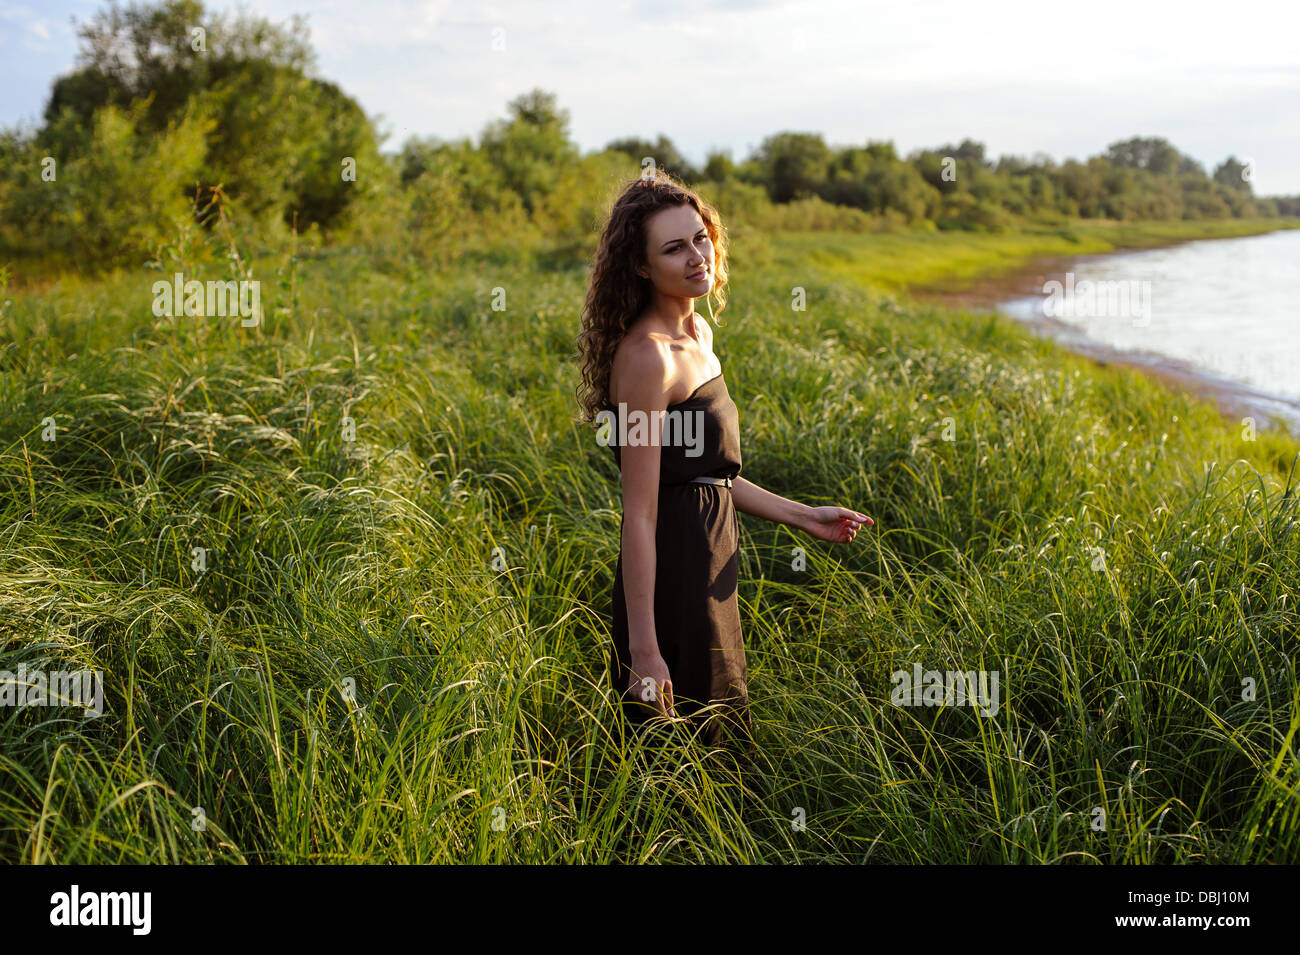 Beautiful girl walks in high grass on the banks of river. Stock Photo